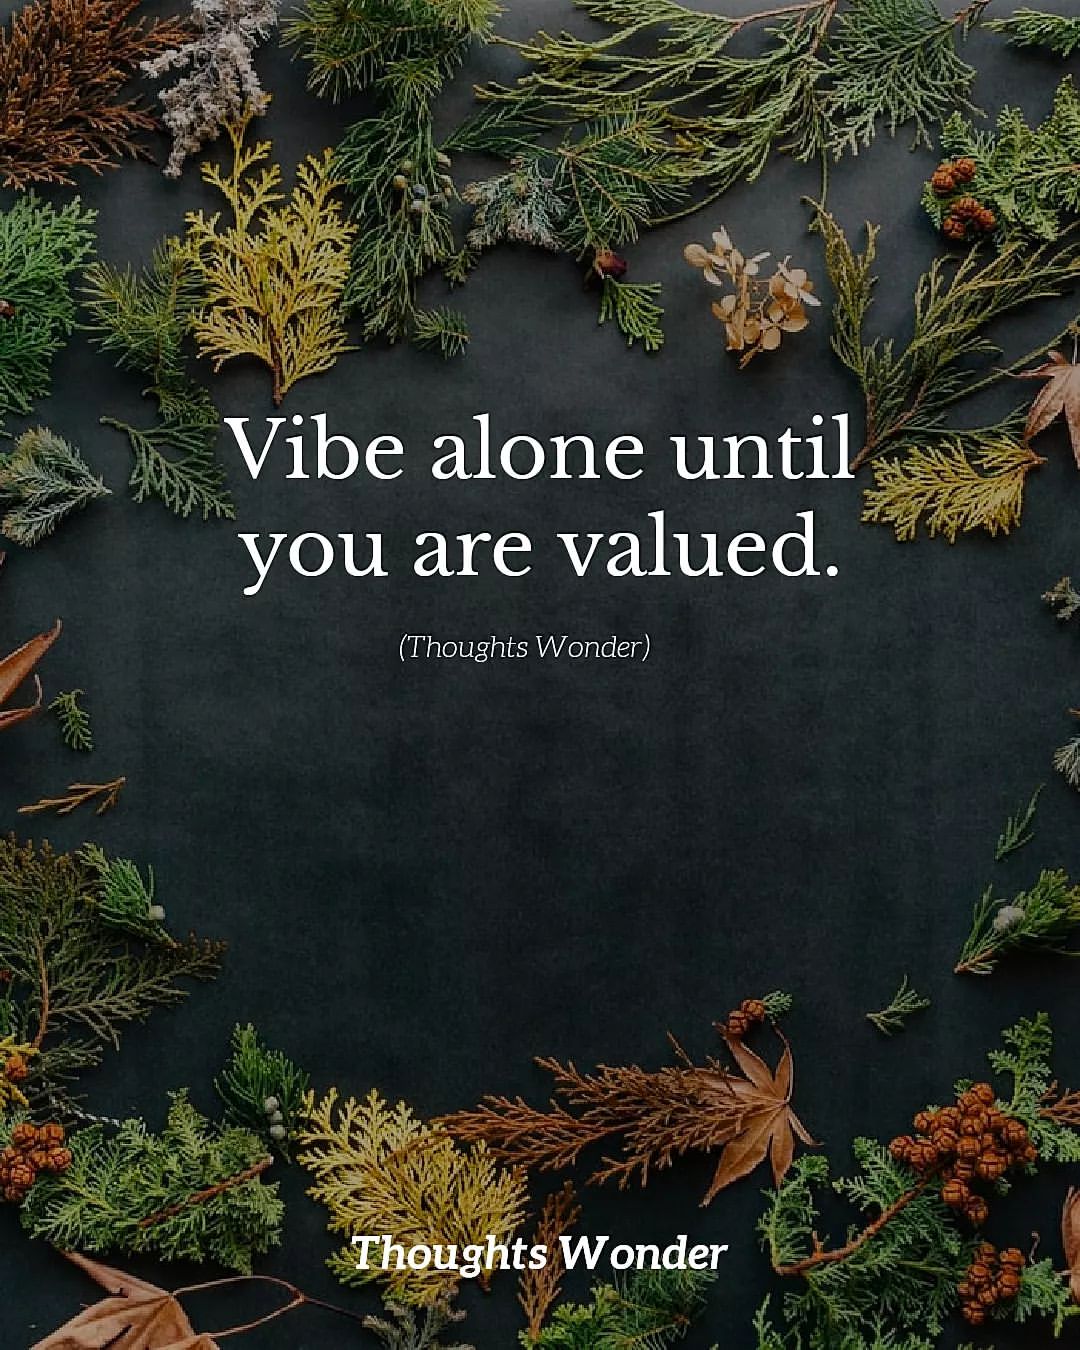 Vibe alone until you are valued.